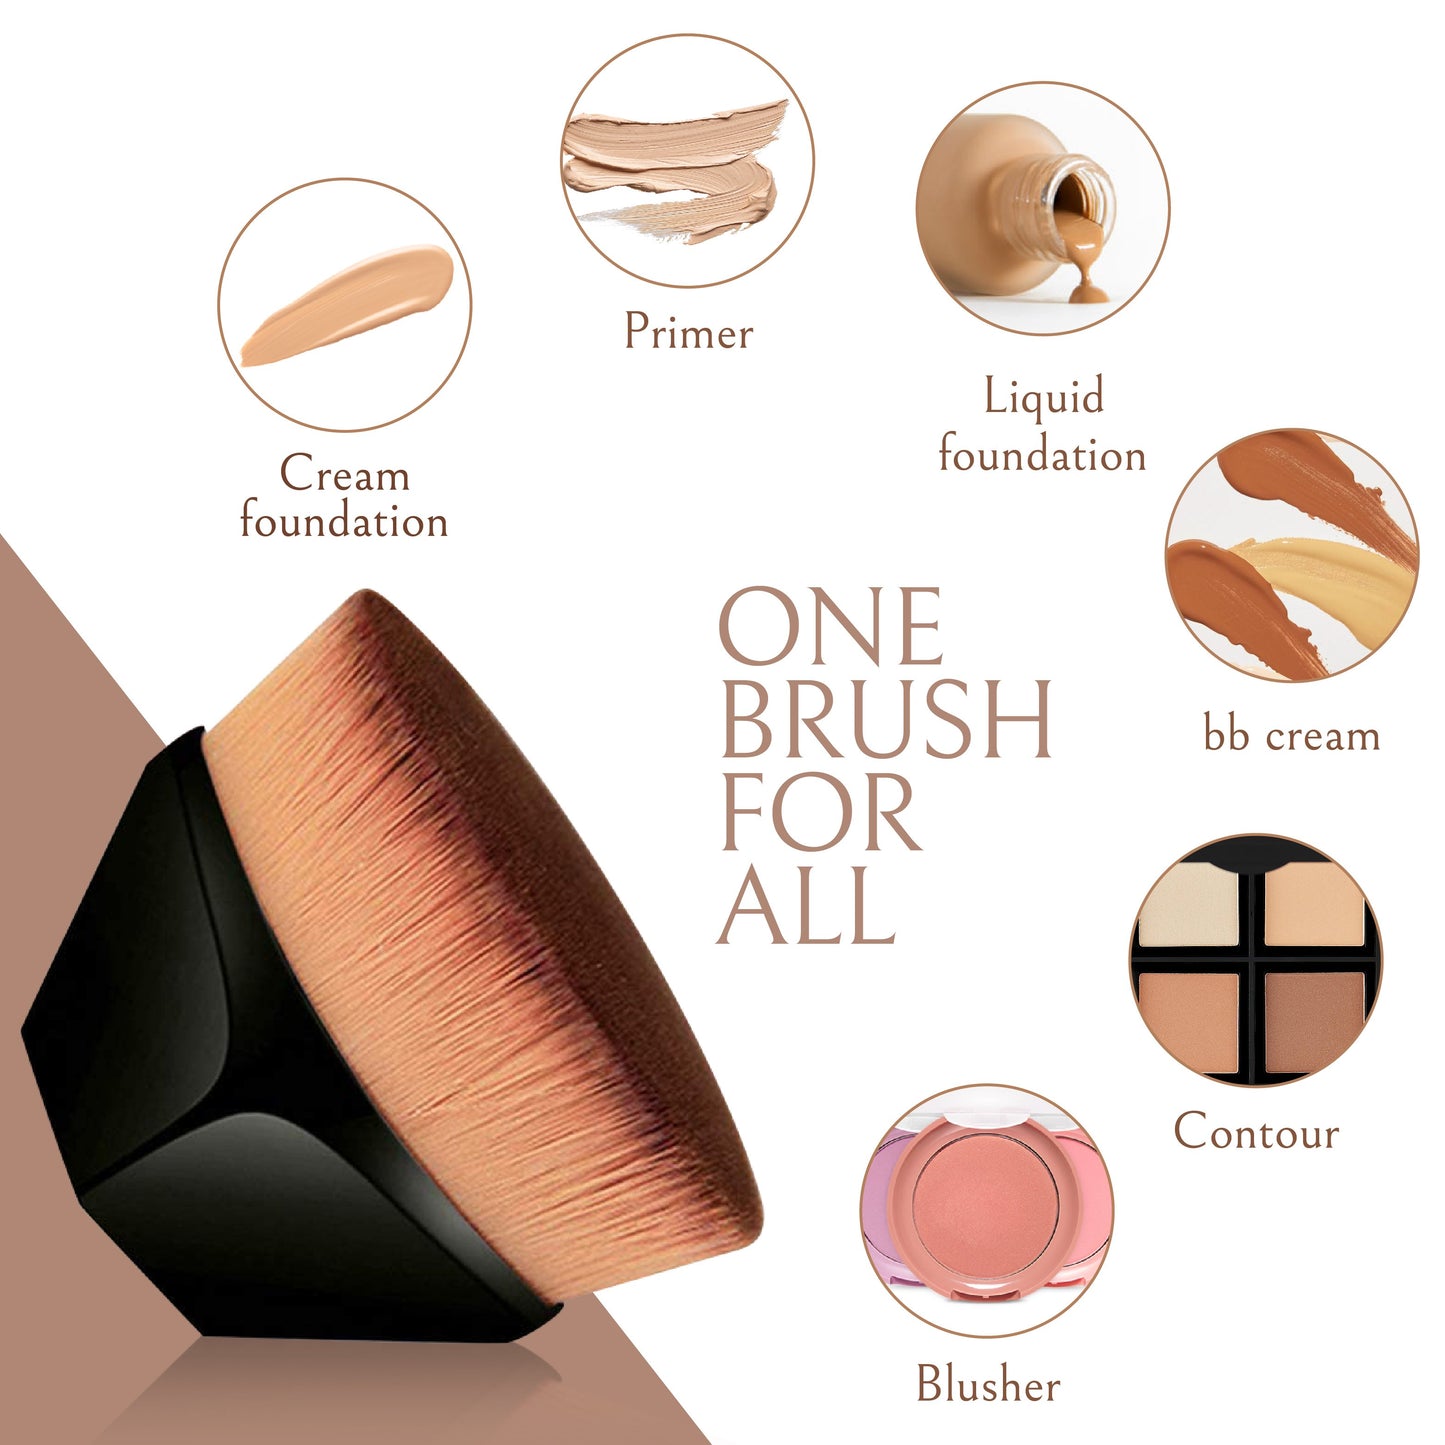 Foundation Concealer Makeup Brush 👧 UP TO 70% OFF NOW! 👧